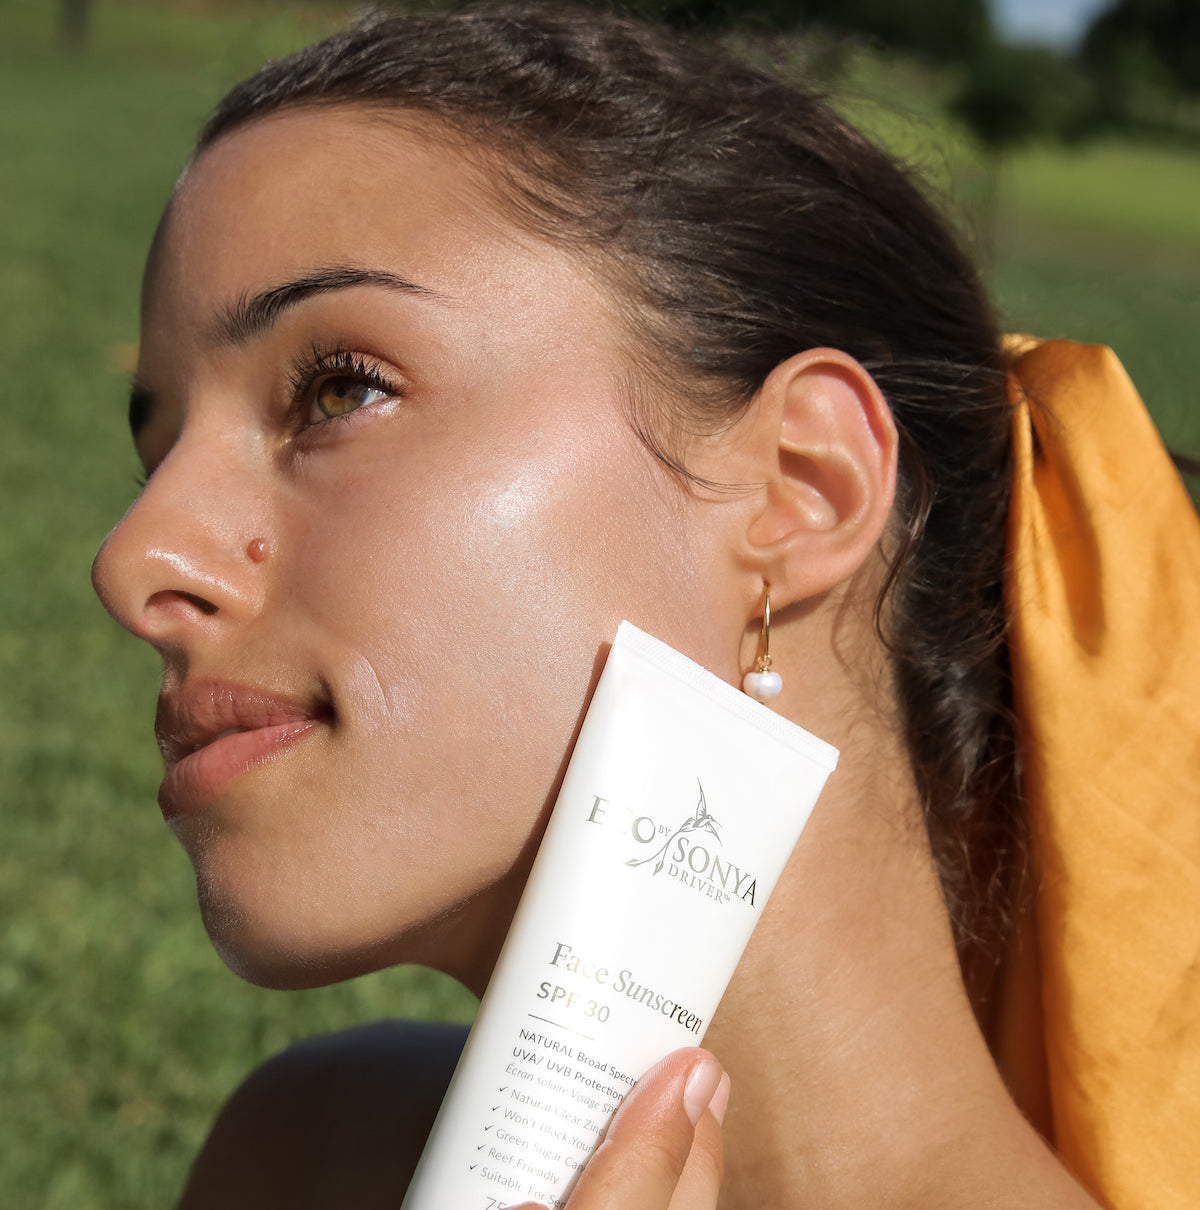 Introducing Our Amazing New Face Sunscreen!